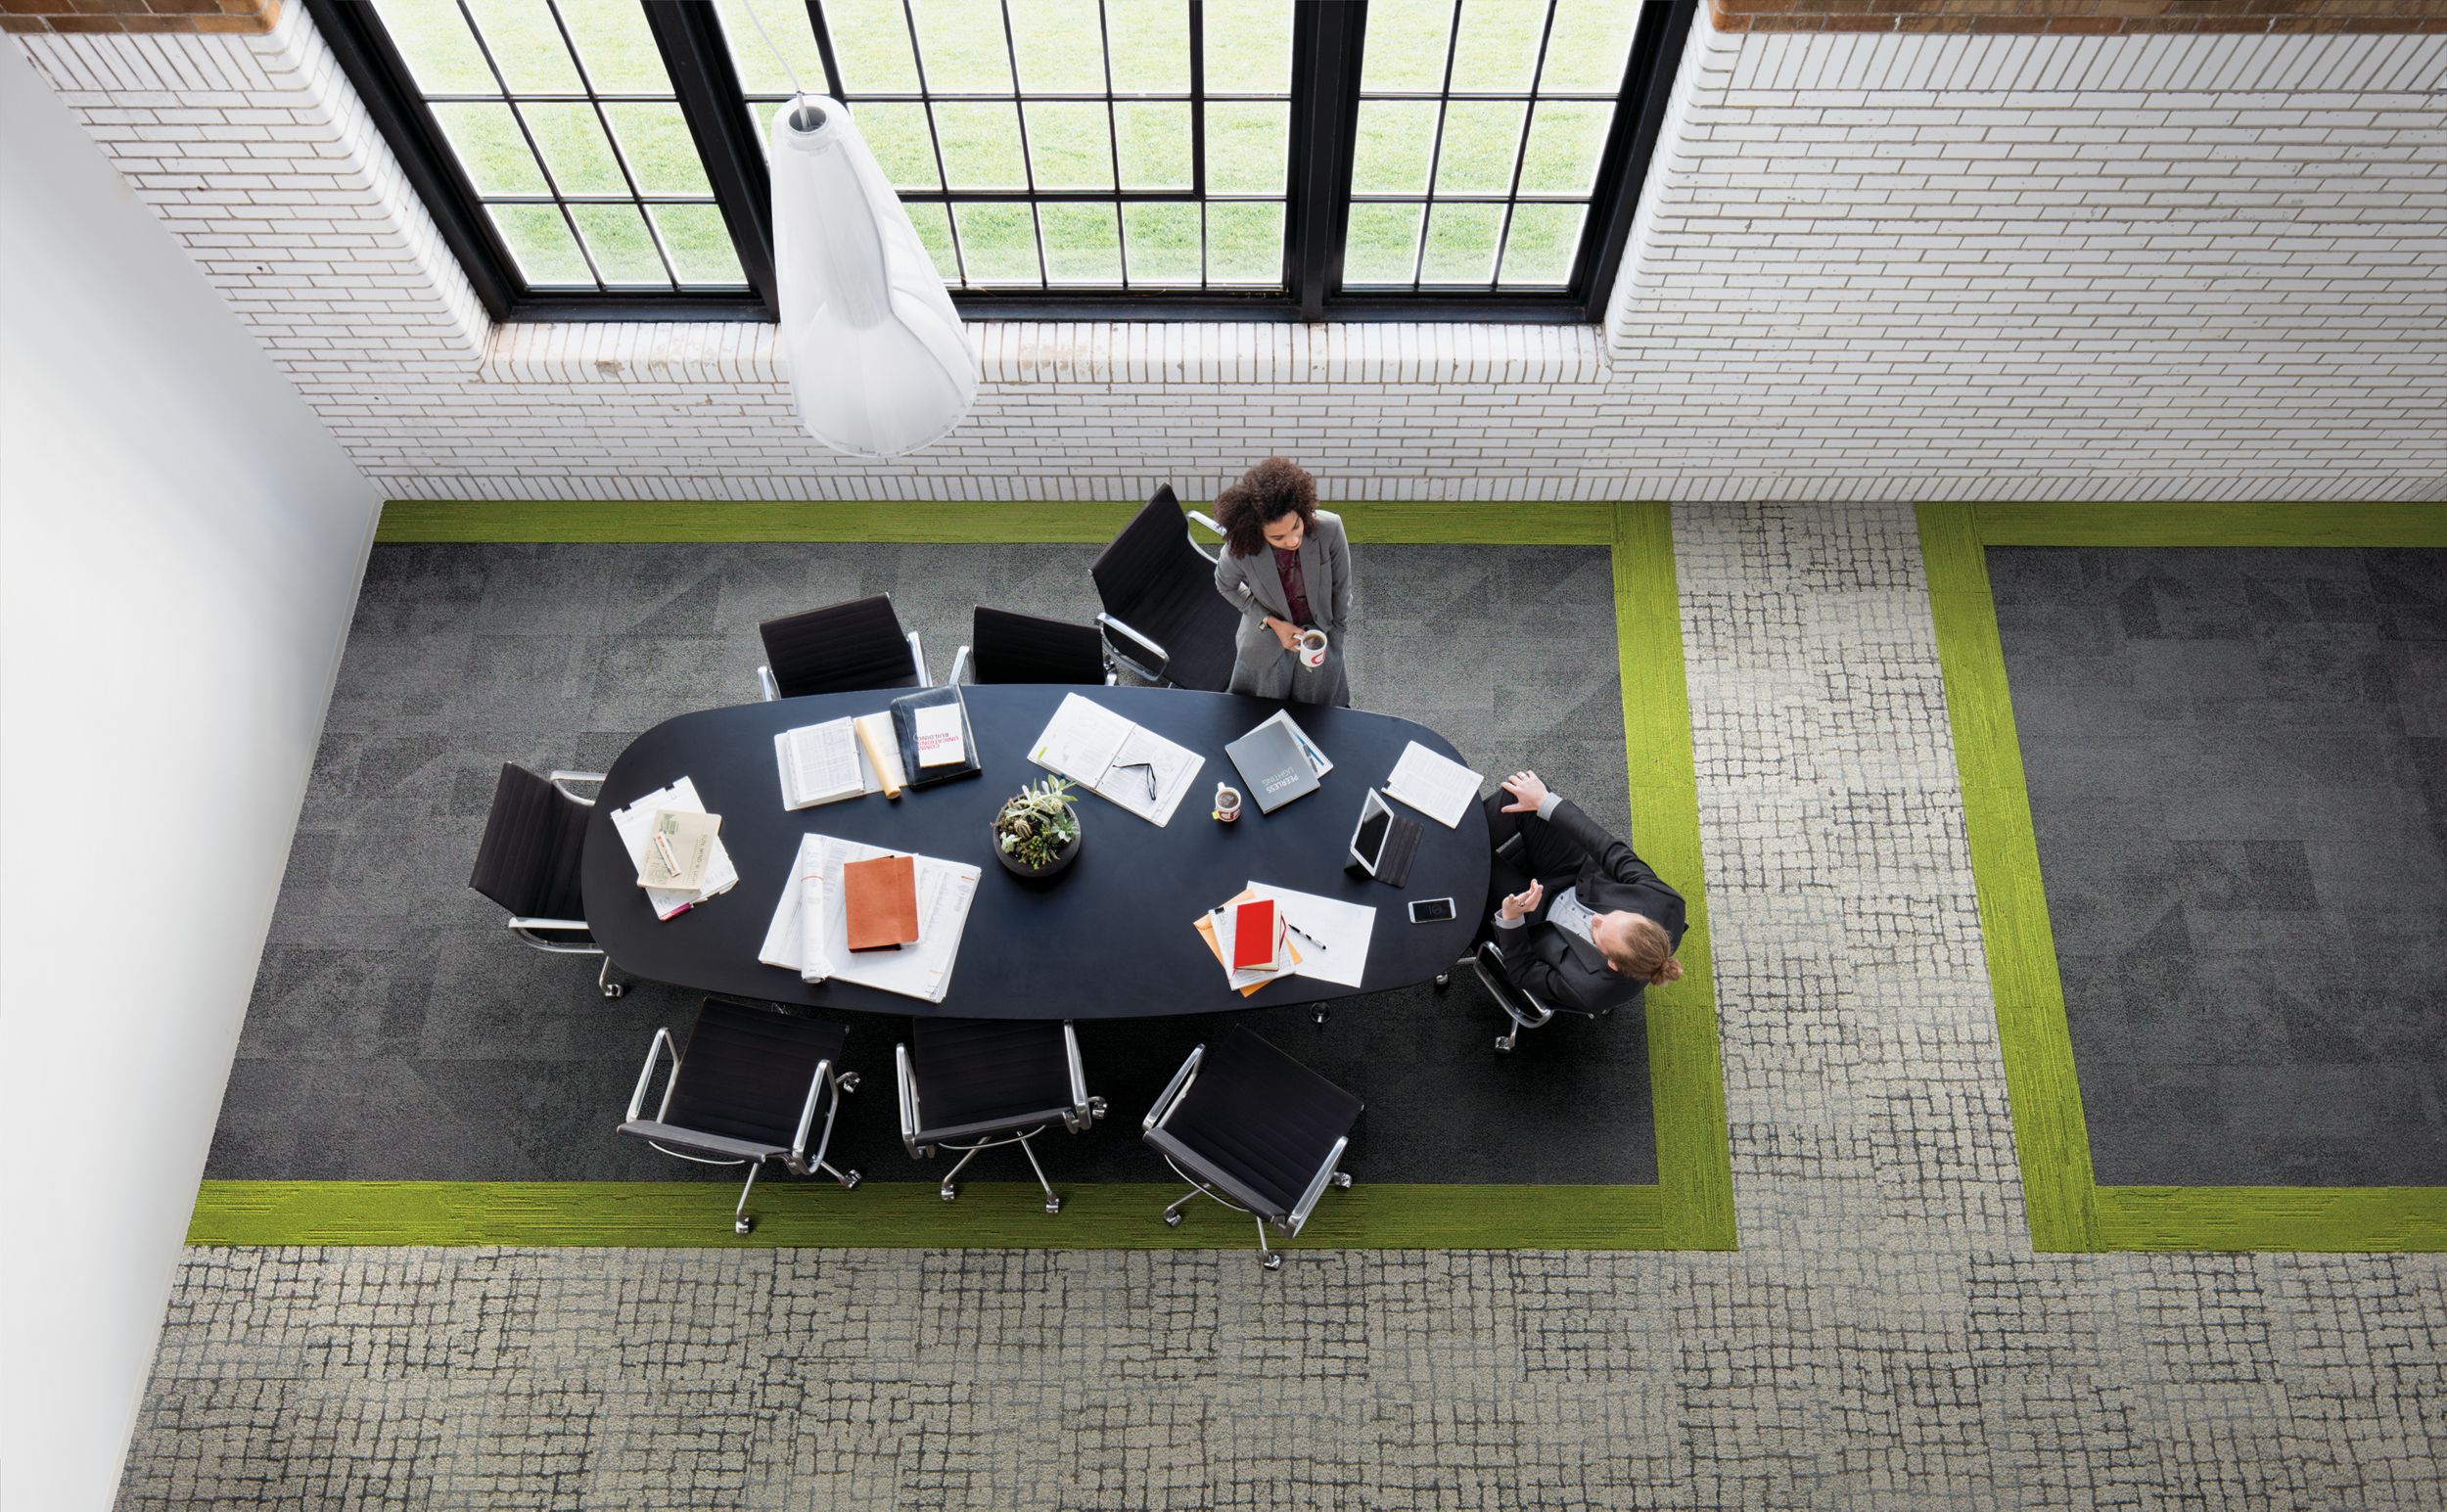 Interface Paver and Sett in Stone carpet tile with UR501 plank carpet tile in overhead view of meeting area with man and women conversating image number 3